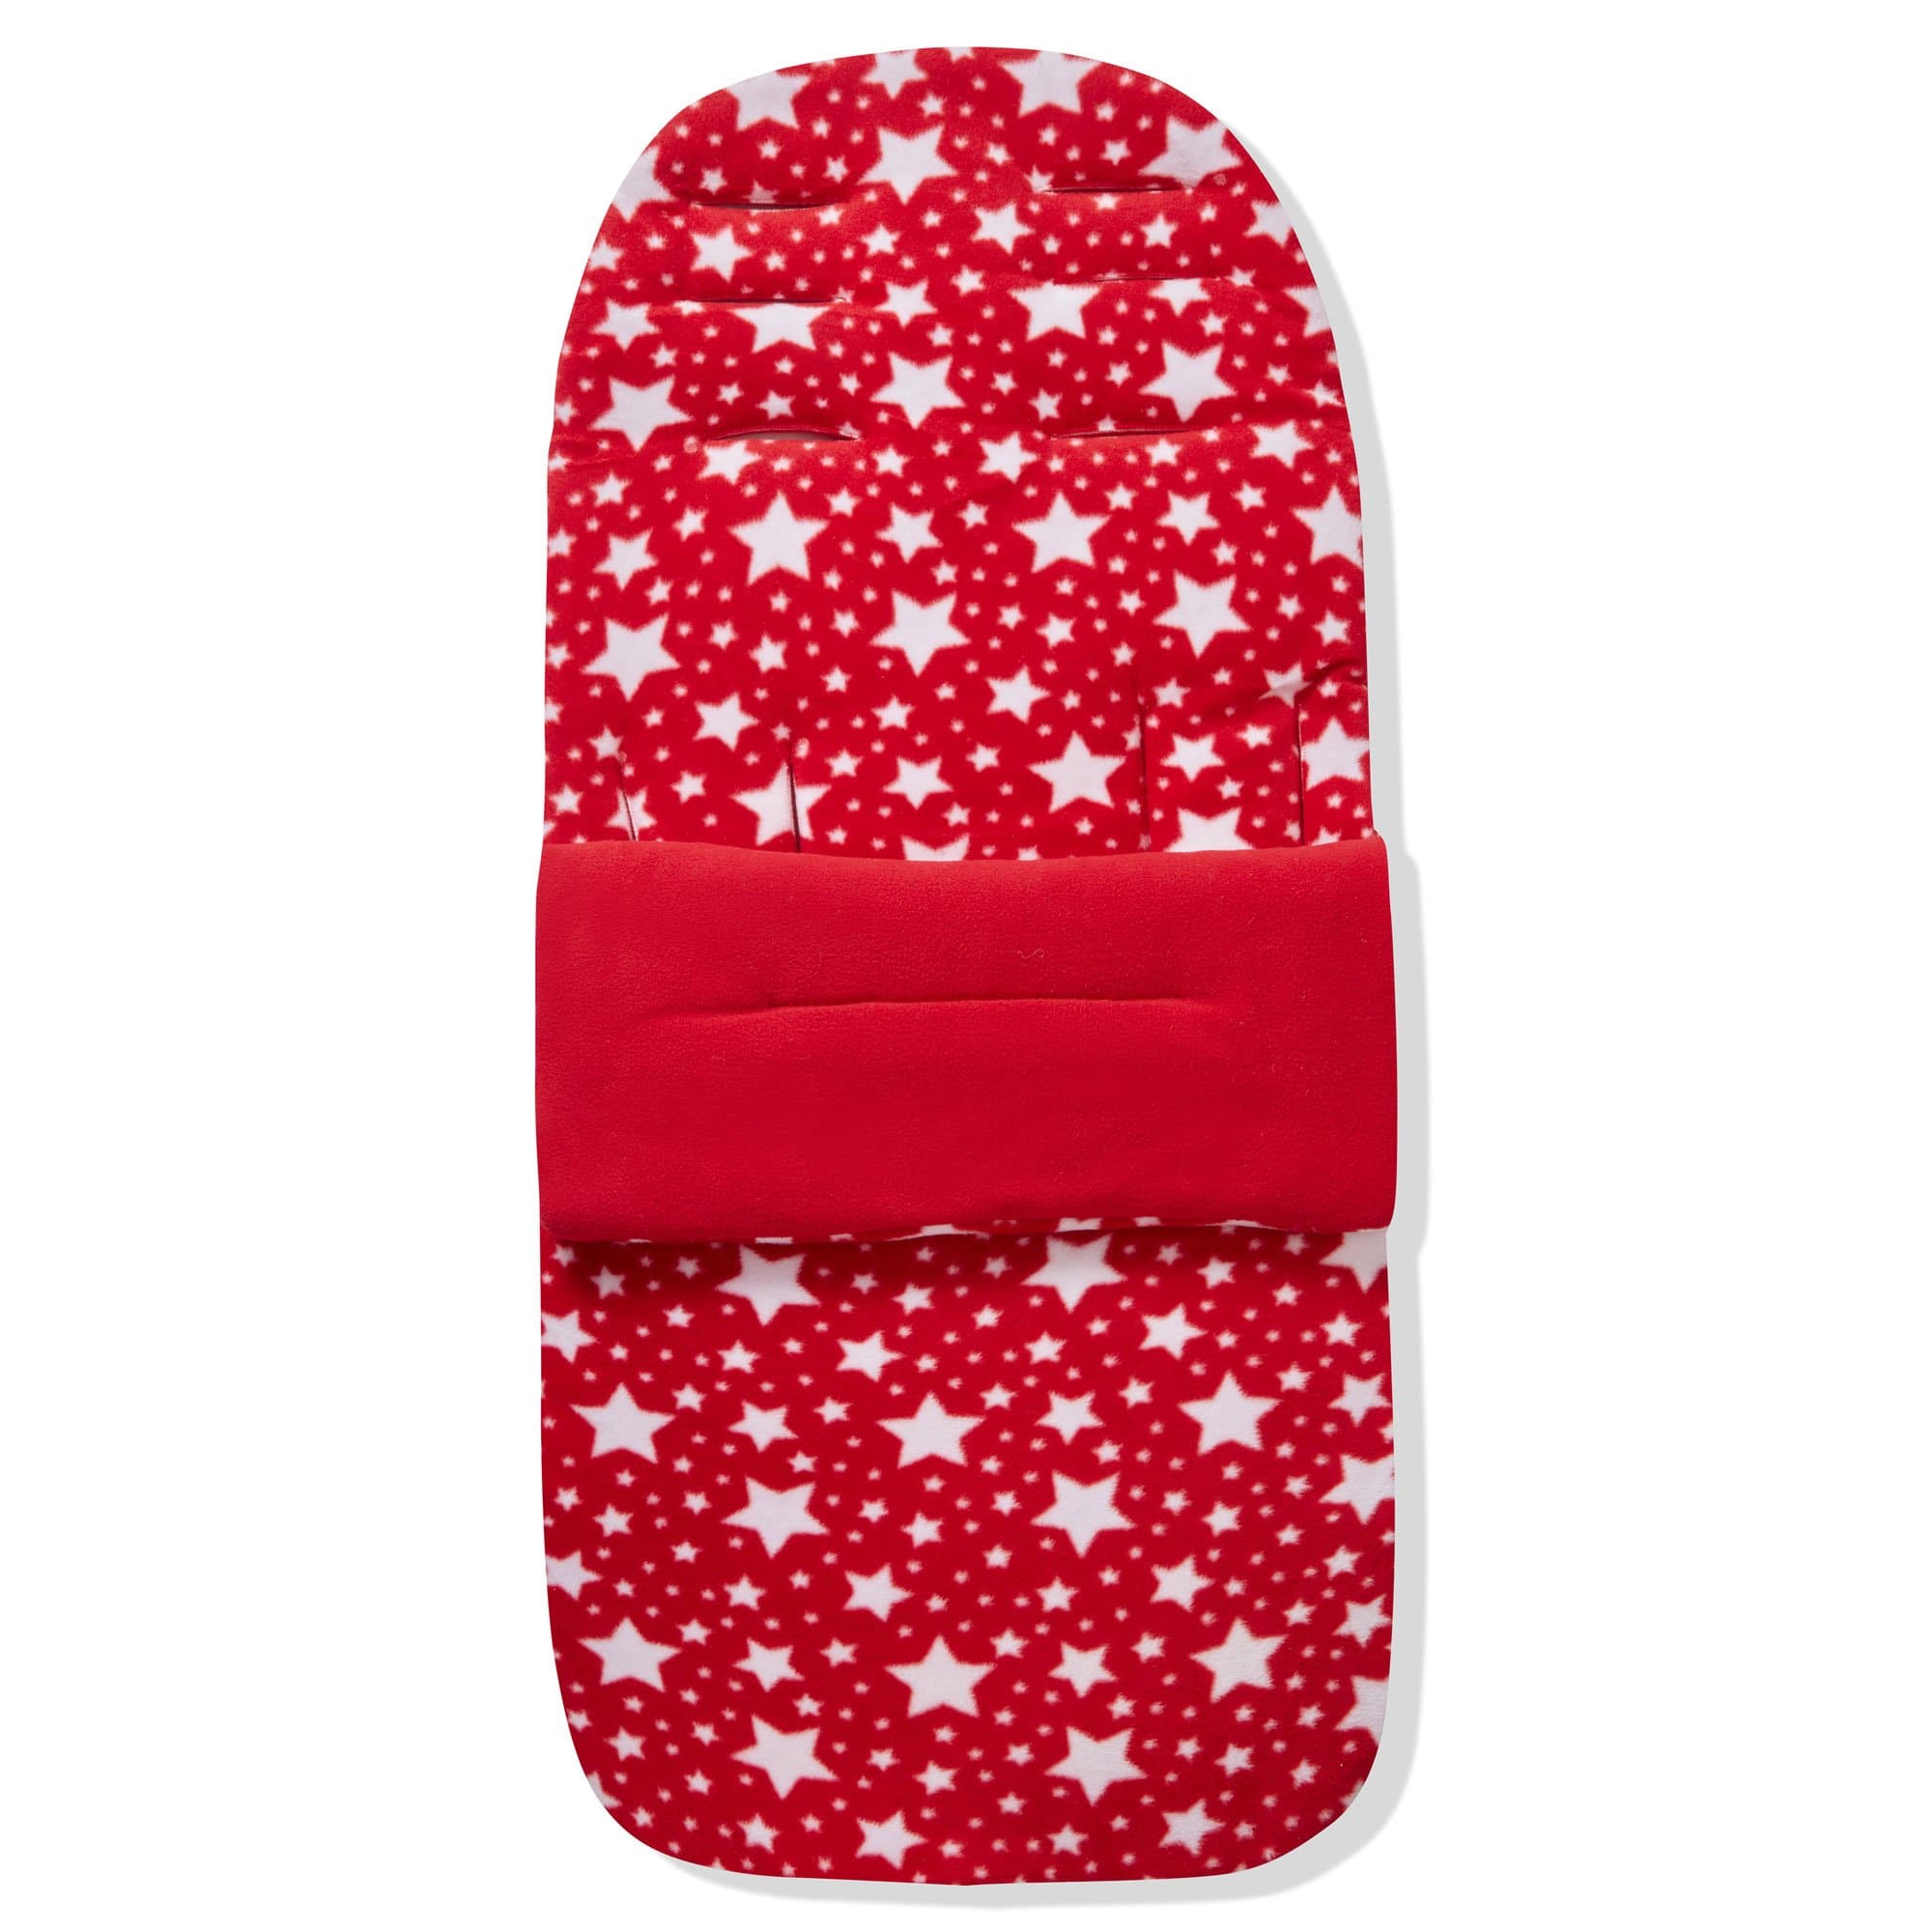 Fleece Footmuff / Cosy Toes Compatible with Bebe 9 - For Your Little One